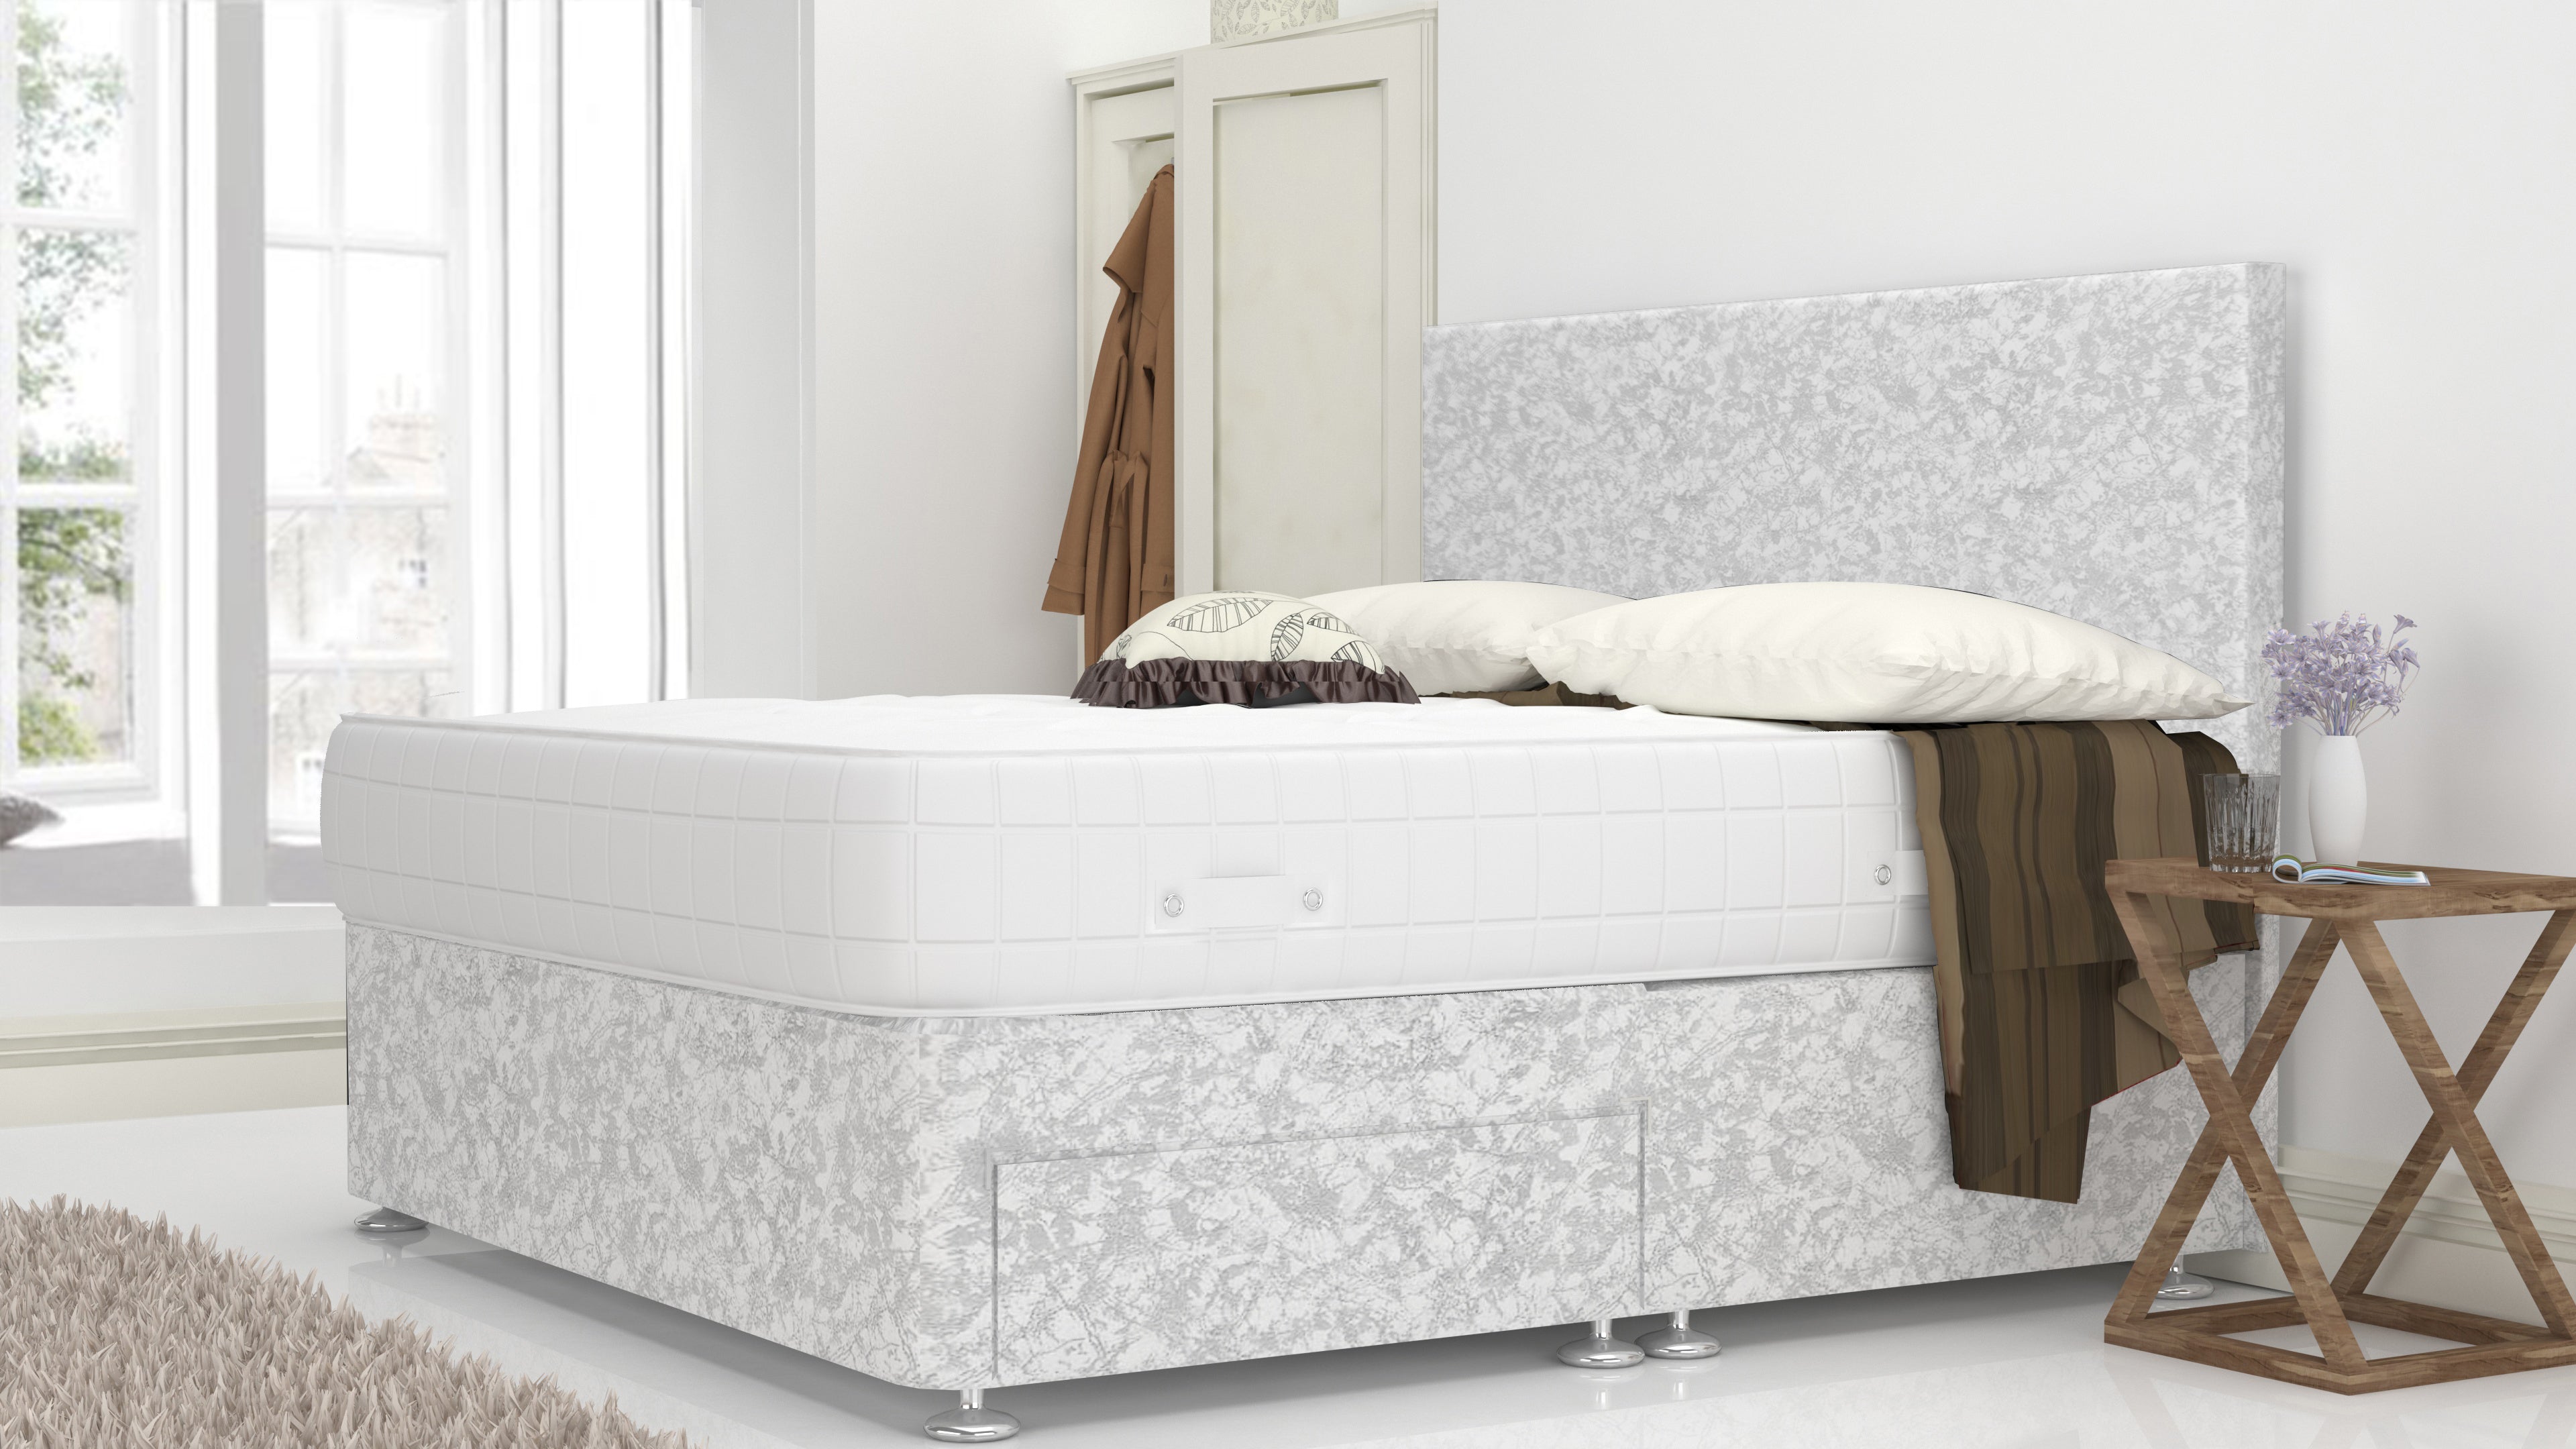 White Crushed Velvet 5 Feet Divan Bed With Plain Headboard (Included Feet) And Free Memory Foam Mattress